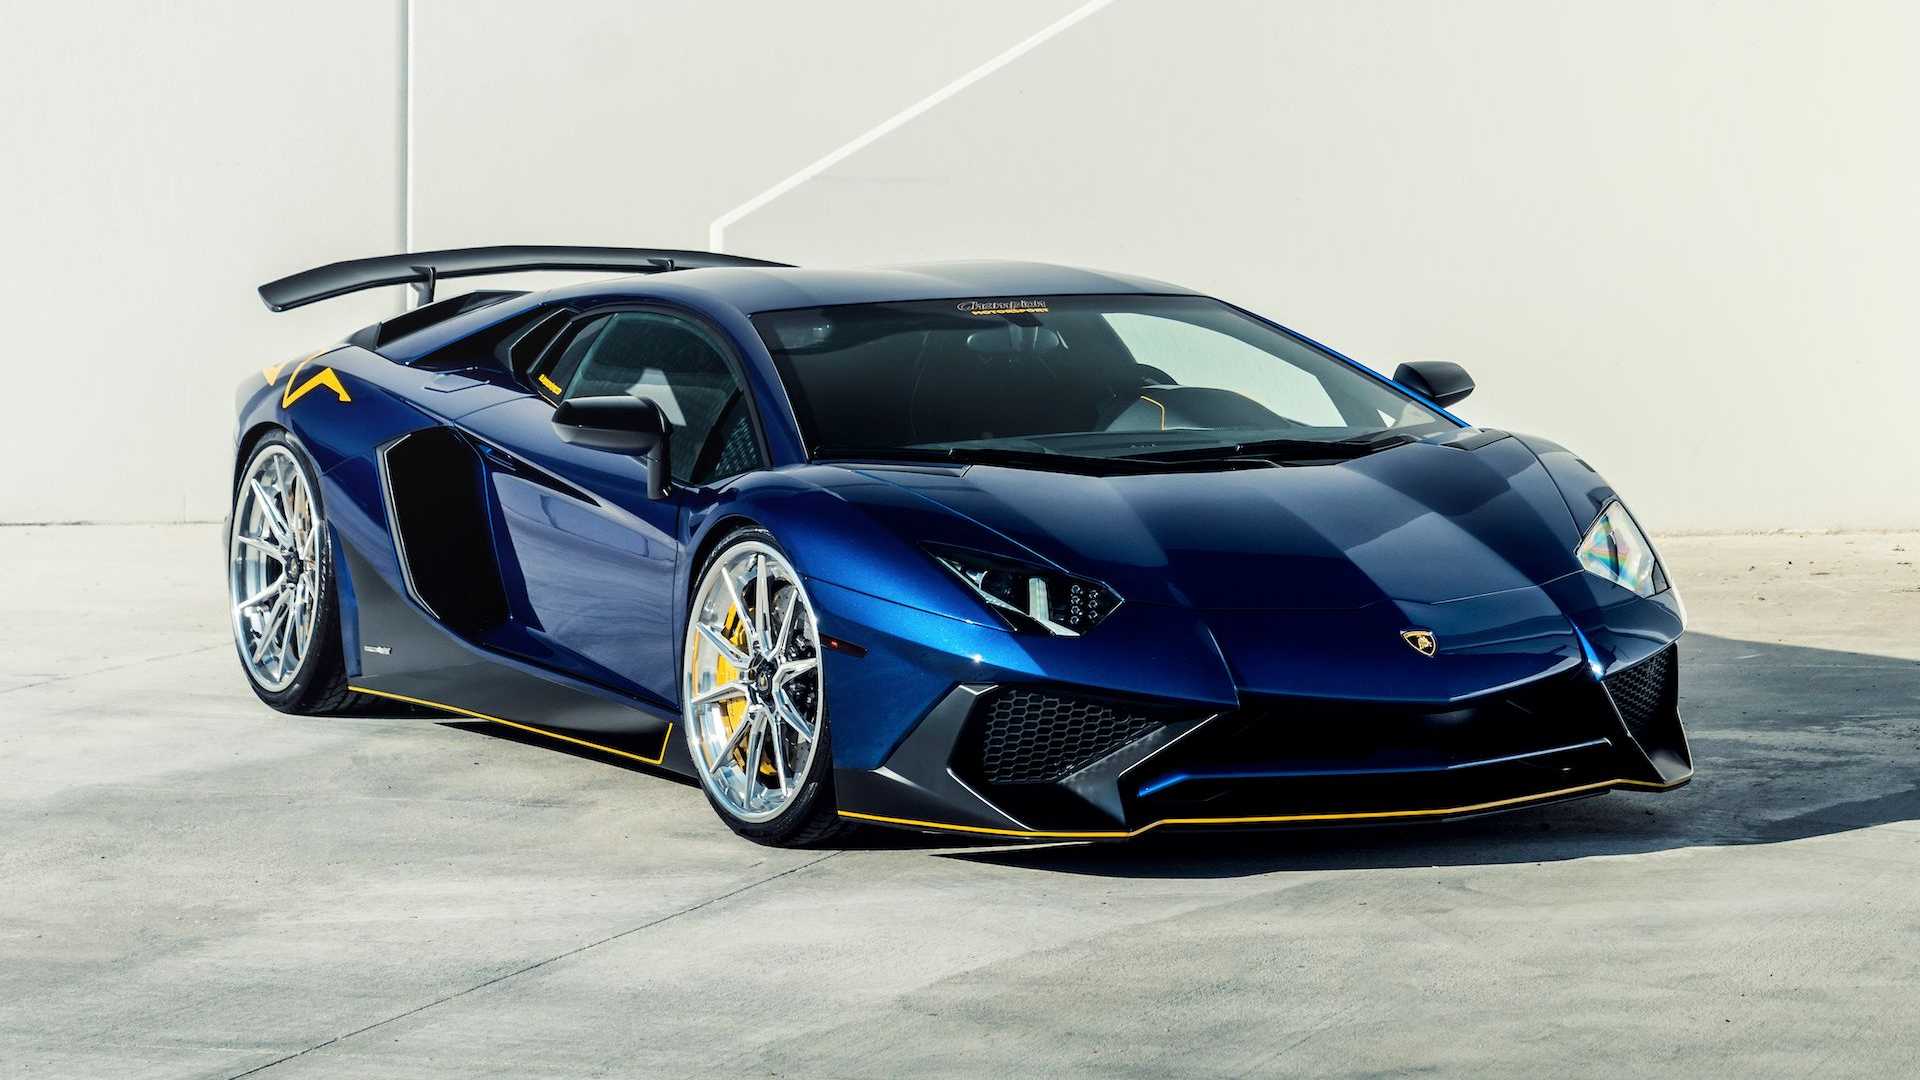 Does This Blue Lamborghini Aventador SV Look Better With 22 Inch Aftermarket Wheels?